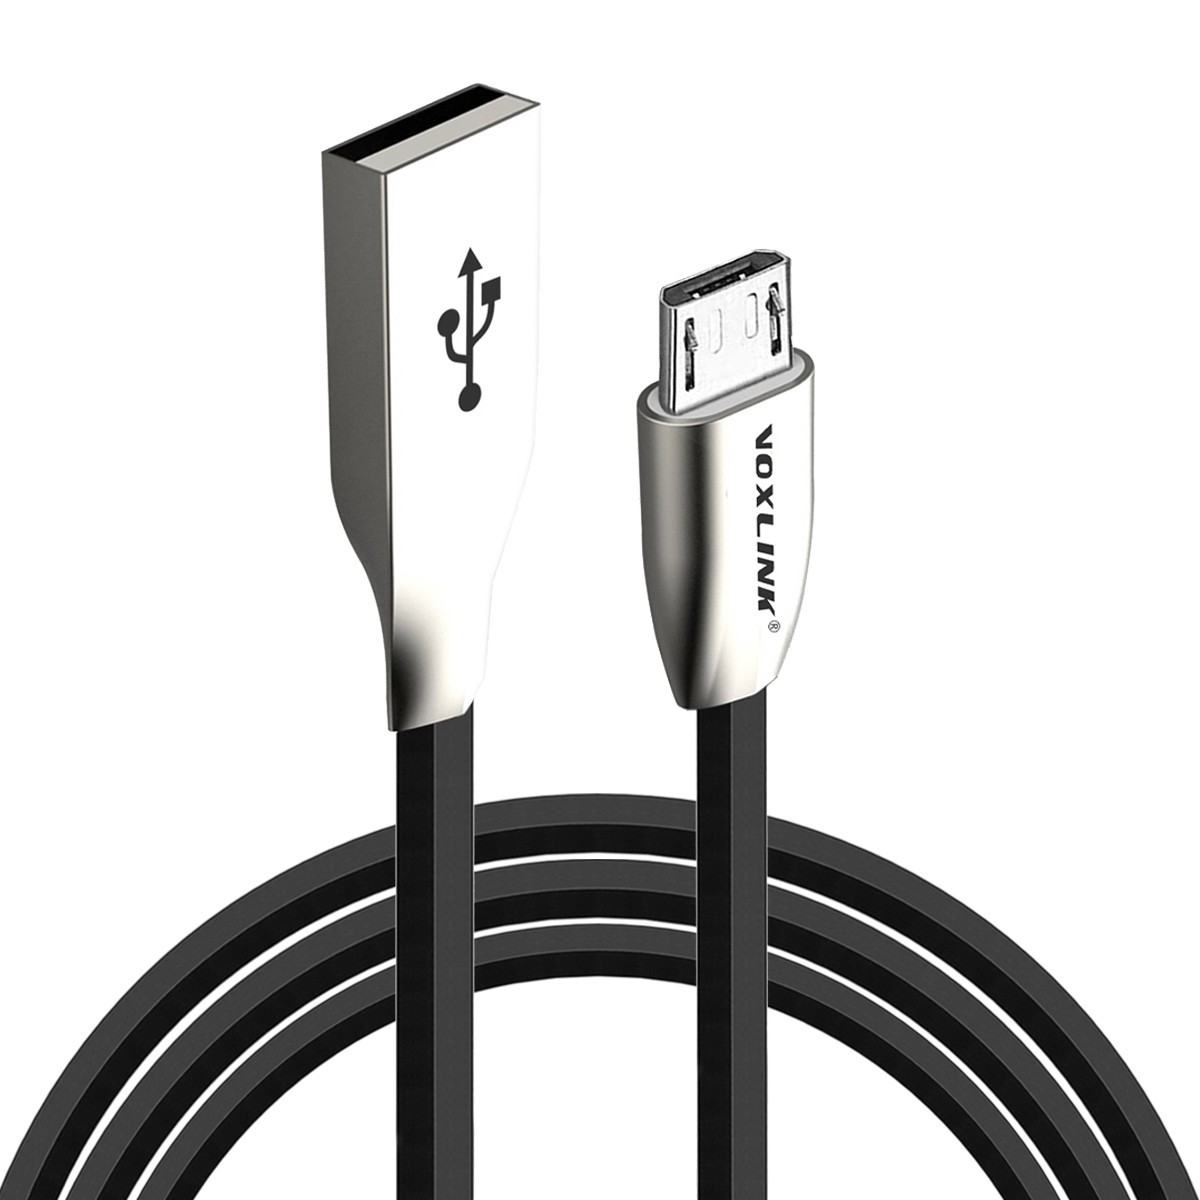 Original usb charger cable VOXLINK 3D Zinc Alloy Fast Charging Data Sync Micro USB Cable for Samsung Sony HTC LG Android phones black 0.5m